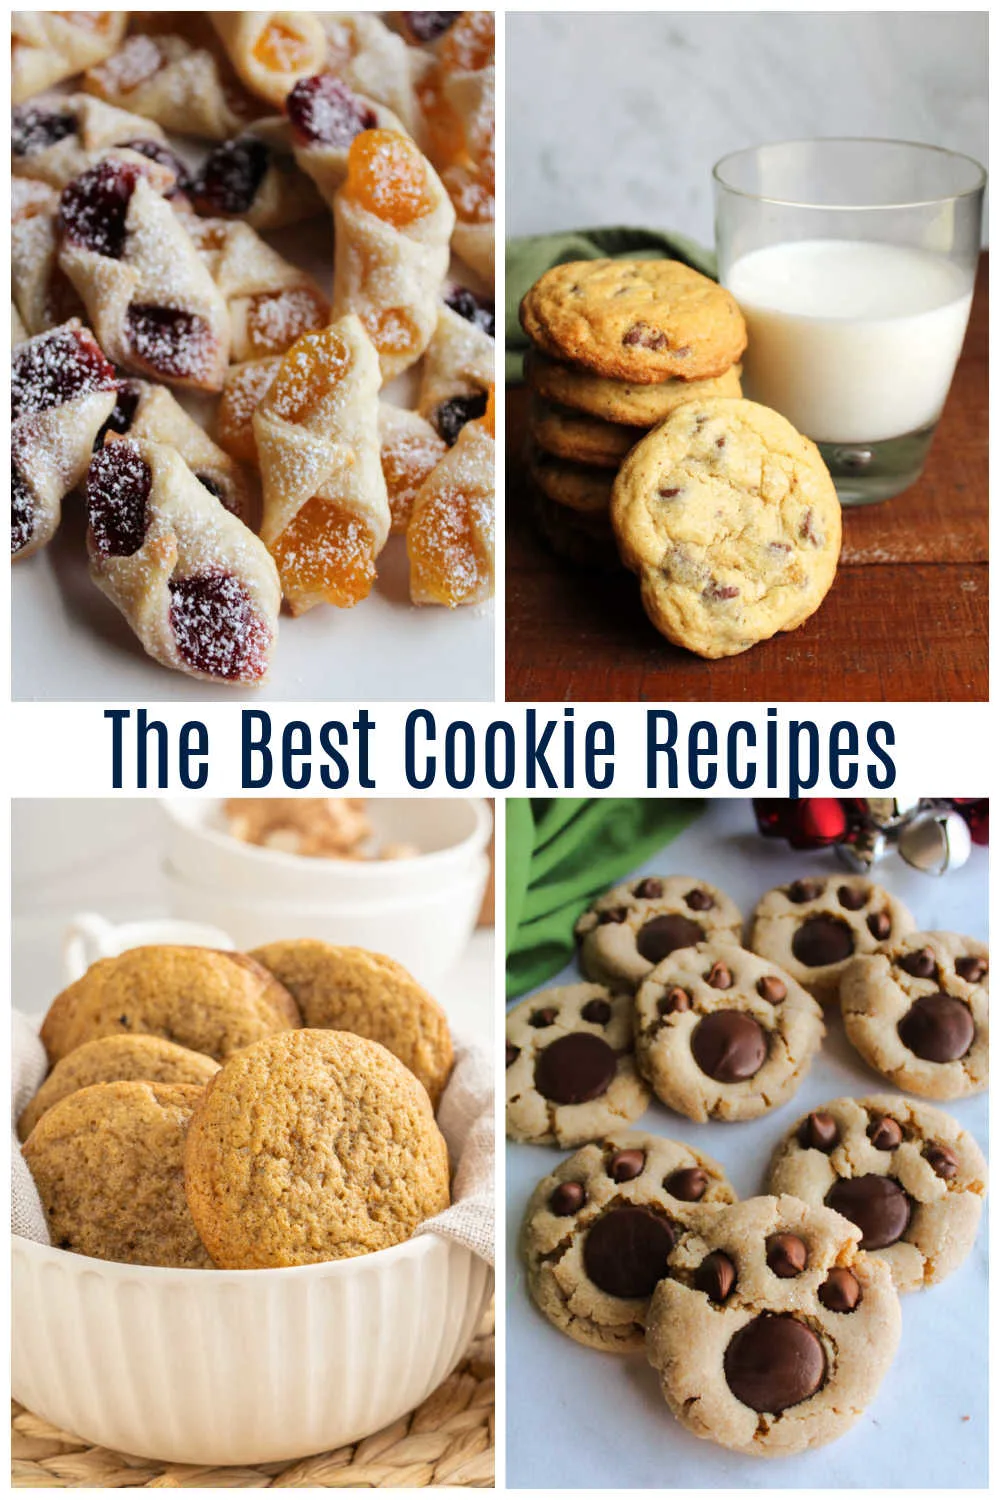 This collection of cookie recipes has something for everyone. There are classic chocolate chip cookies and new peanut butter paw print cookies. Check out recipes from my great grandma's collection and new creations we love. It's time to get baking! 